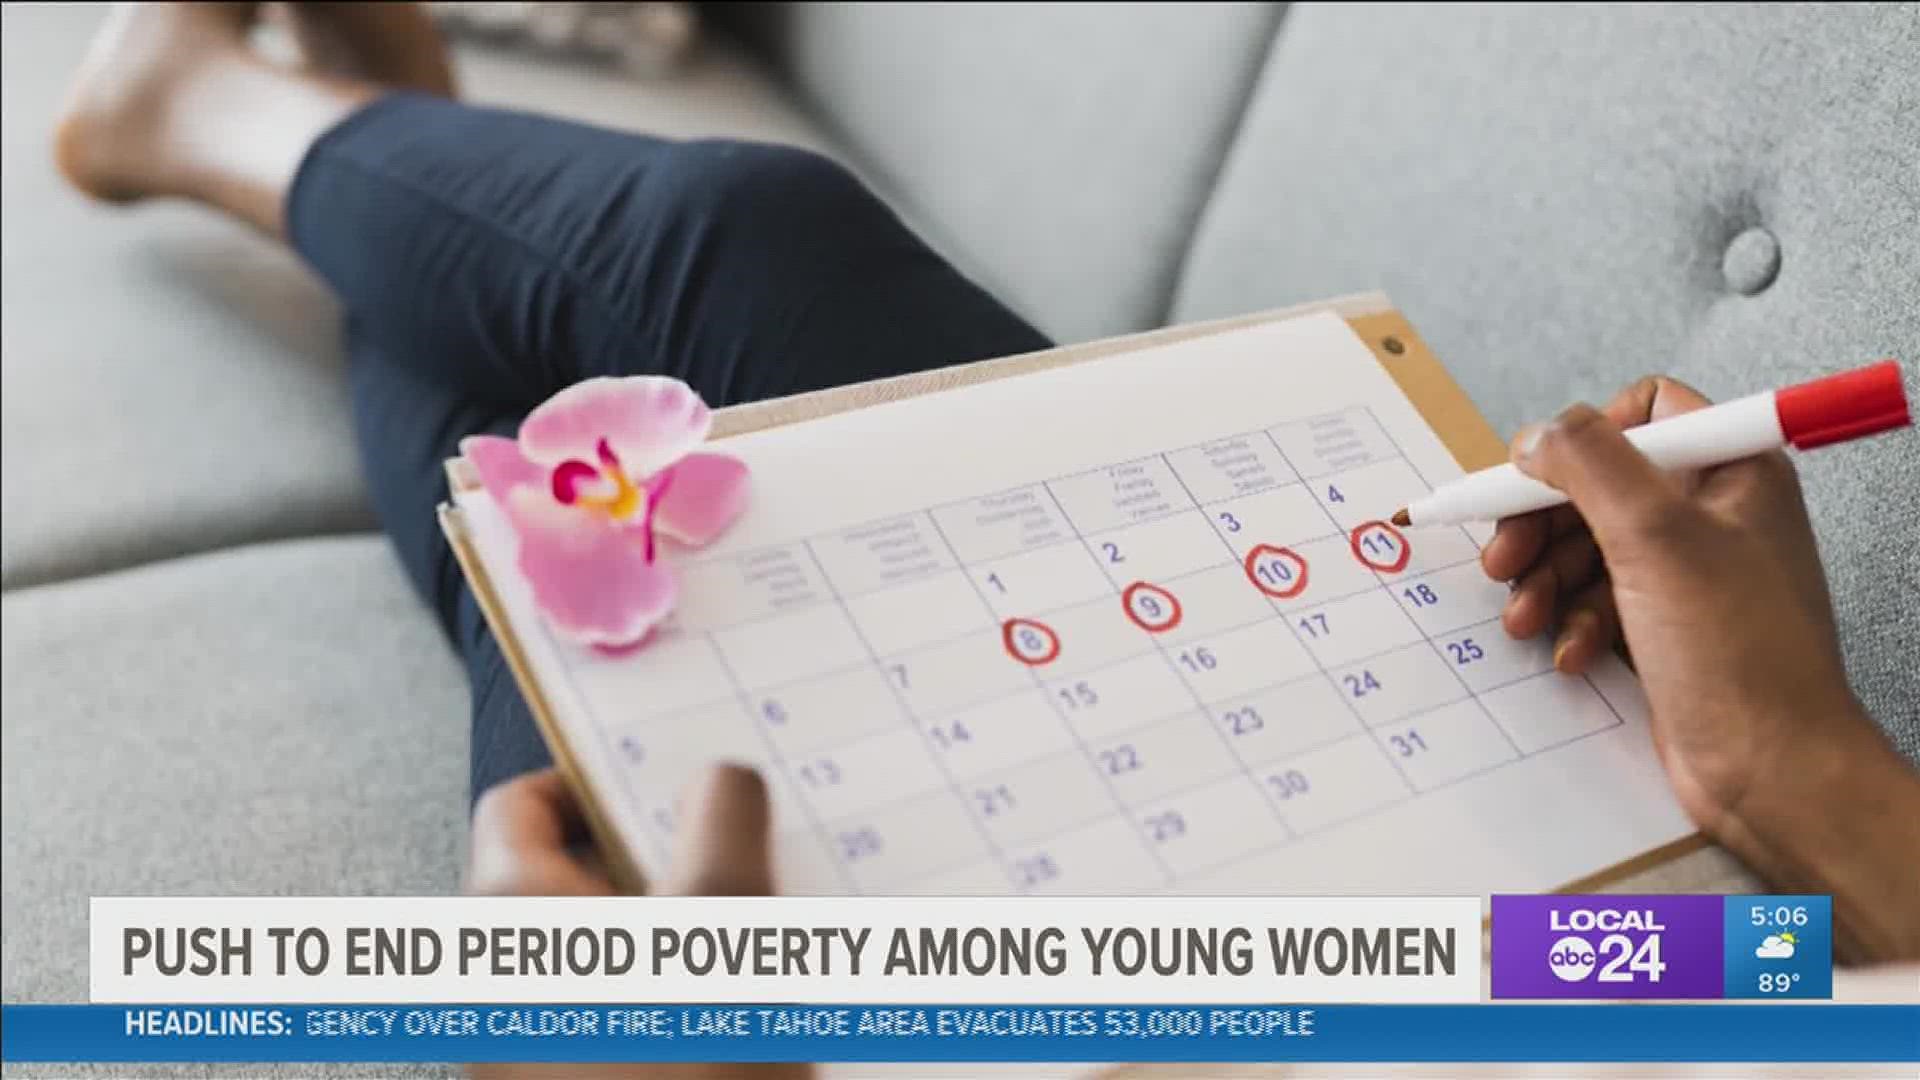 “One in five girls between the ages of 14 and 21 miss school because they don’t have what they need during their time of month,” said Betina Hunt.